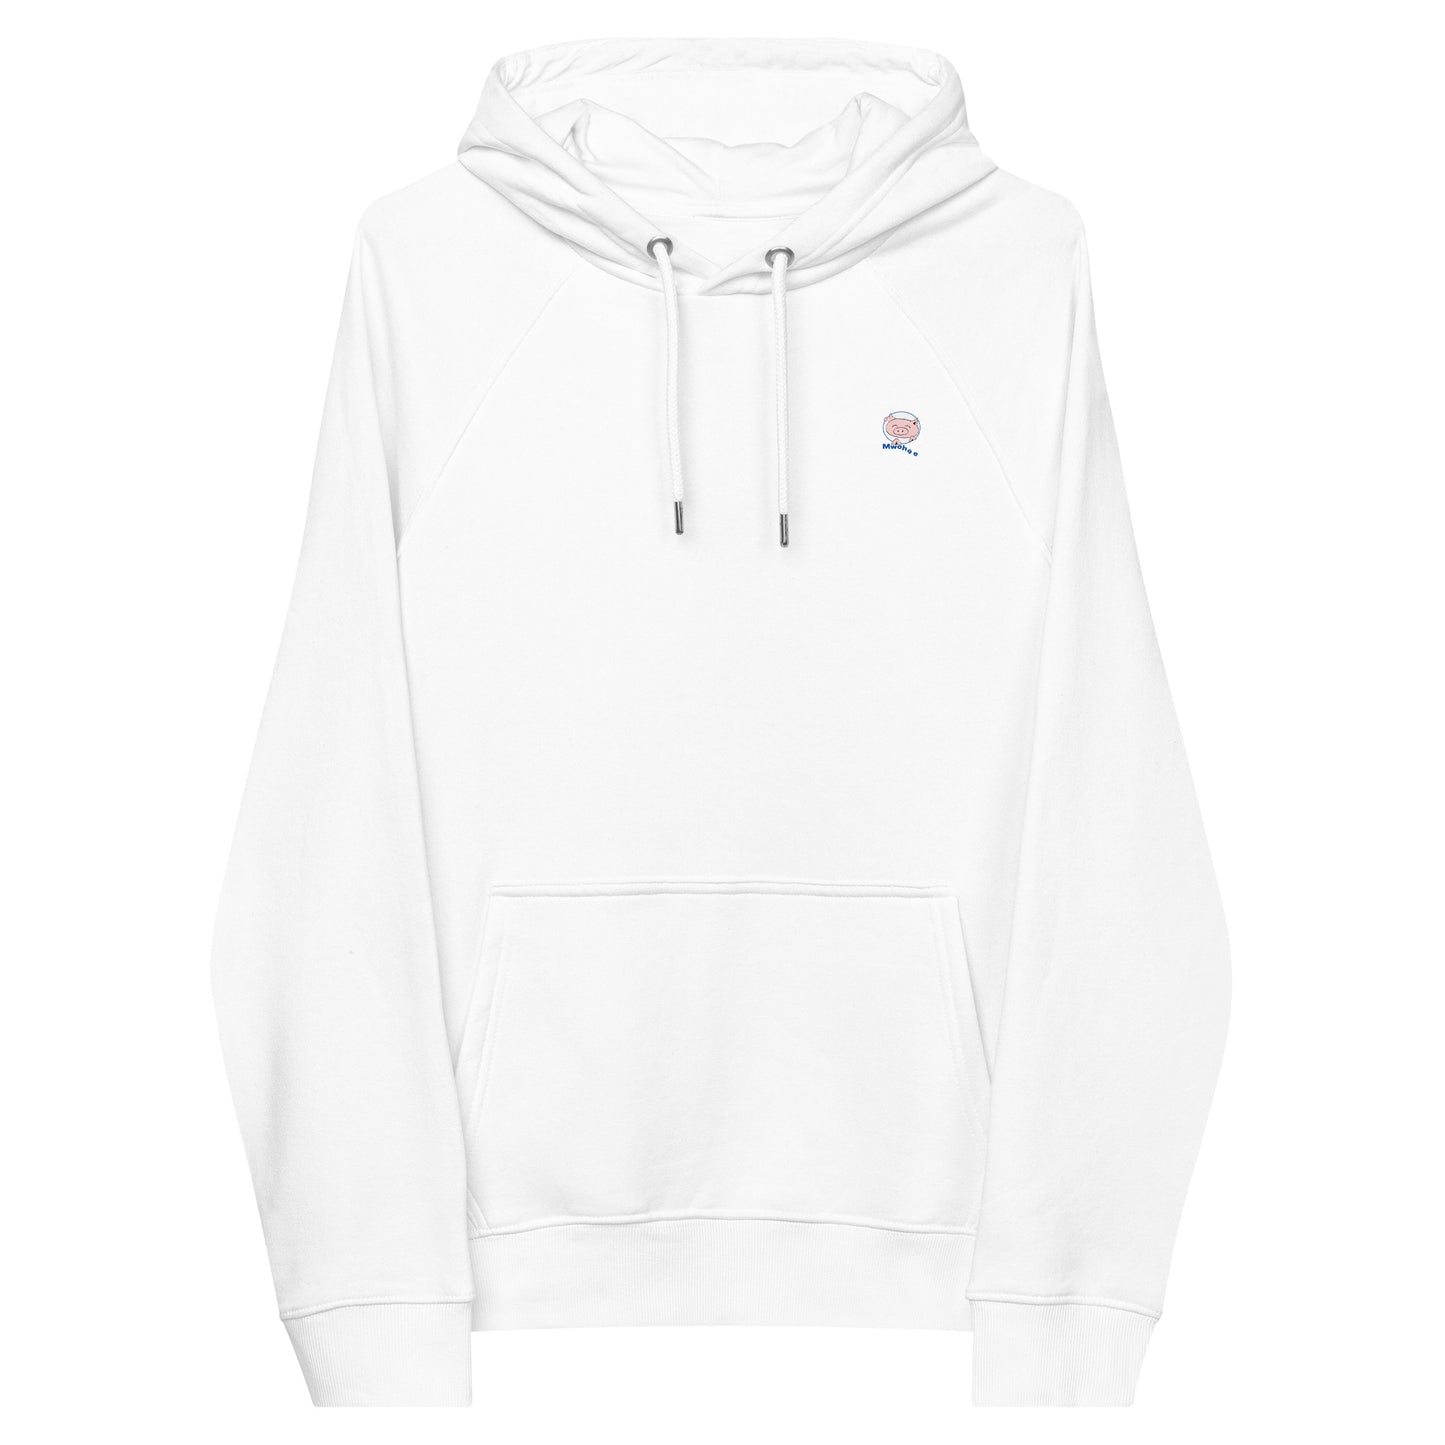 White extra soft hoodie with small Mwohae logo on the left chest